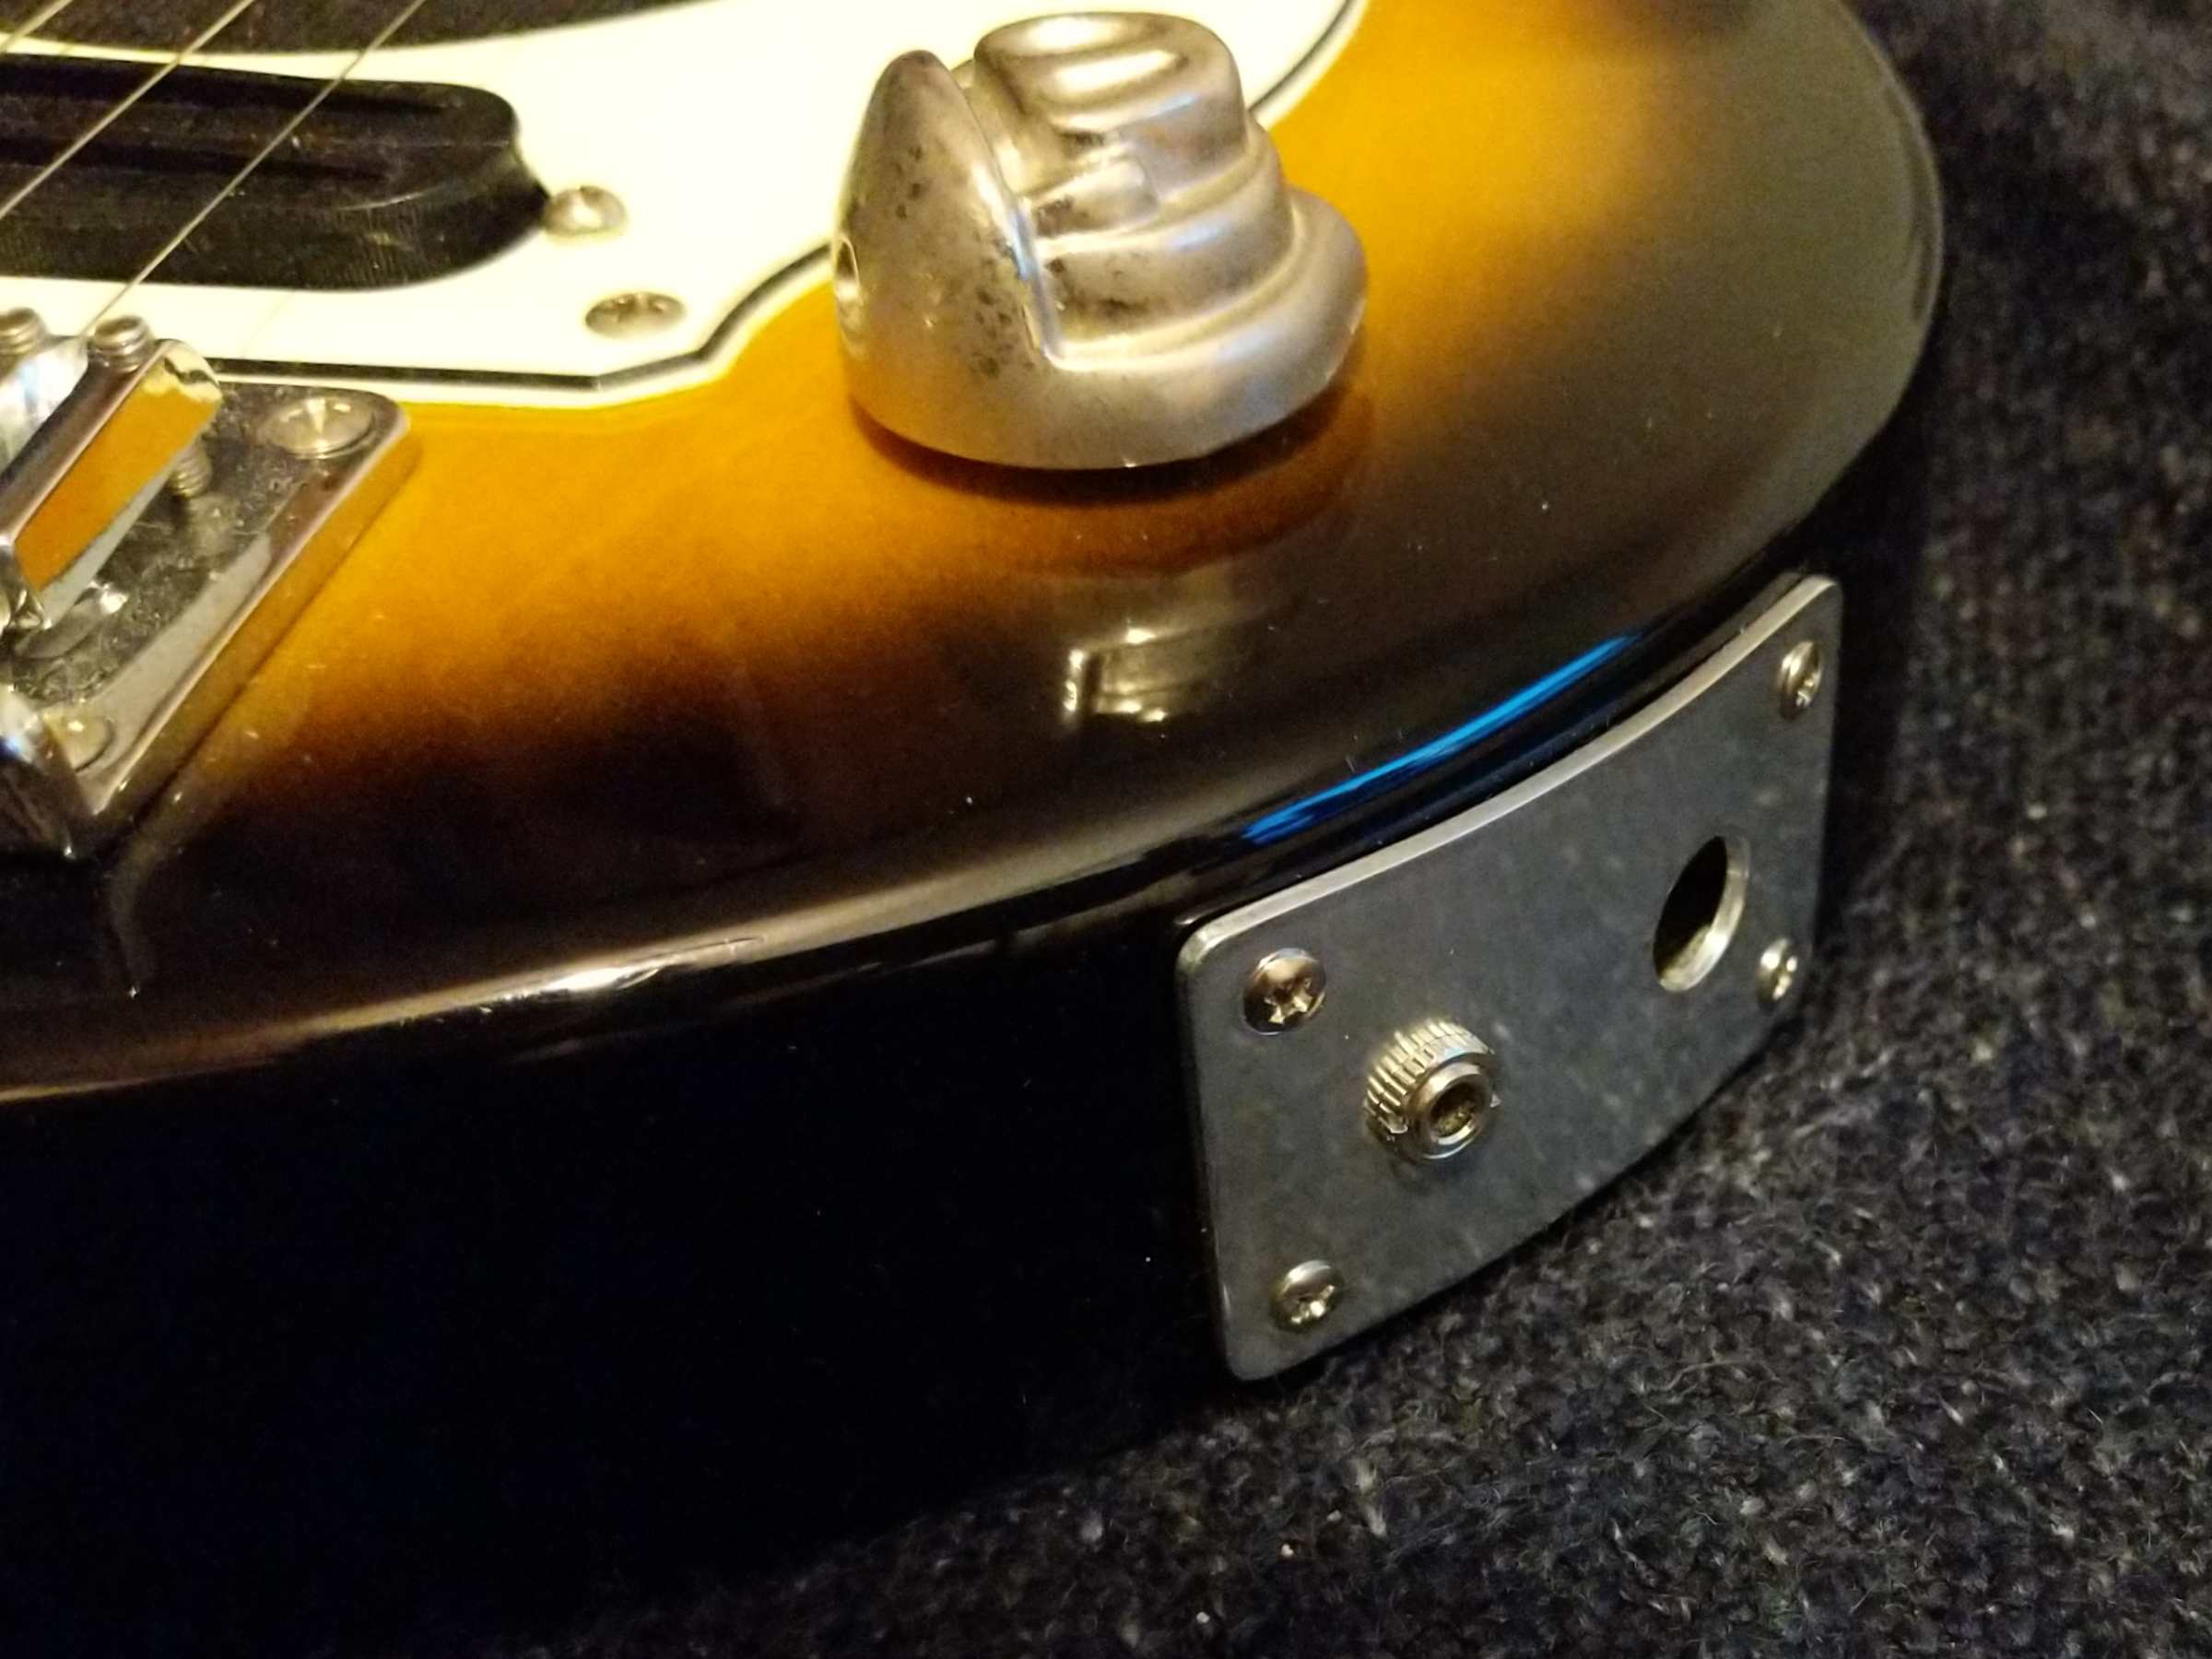 A close-up view of the jack plate fitted to the guitar. It follows the curve very closely, with only a slight gap. It's missing the jack socket.